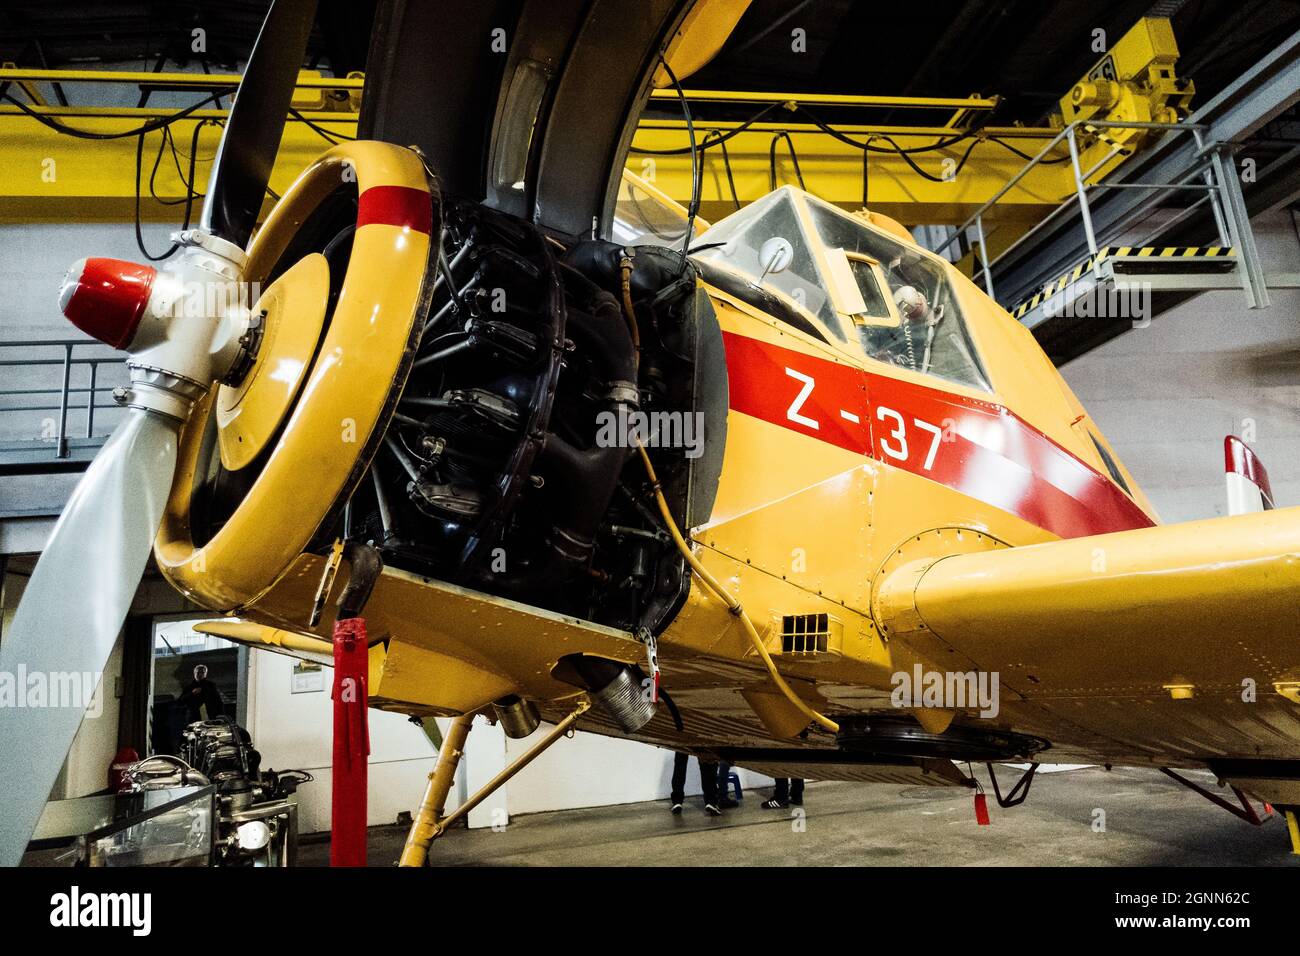 WERNIGERODE, GERMANY - Sep 12, 2021: A closeup of the LET Z-37 Cmelak agricultural aircraft in the Luftfahrt Aviation Museum, Wernigerode, Germany Stock Photo